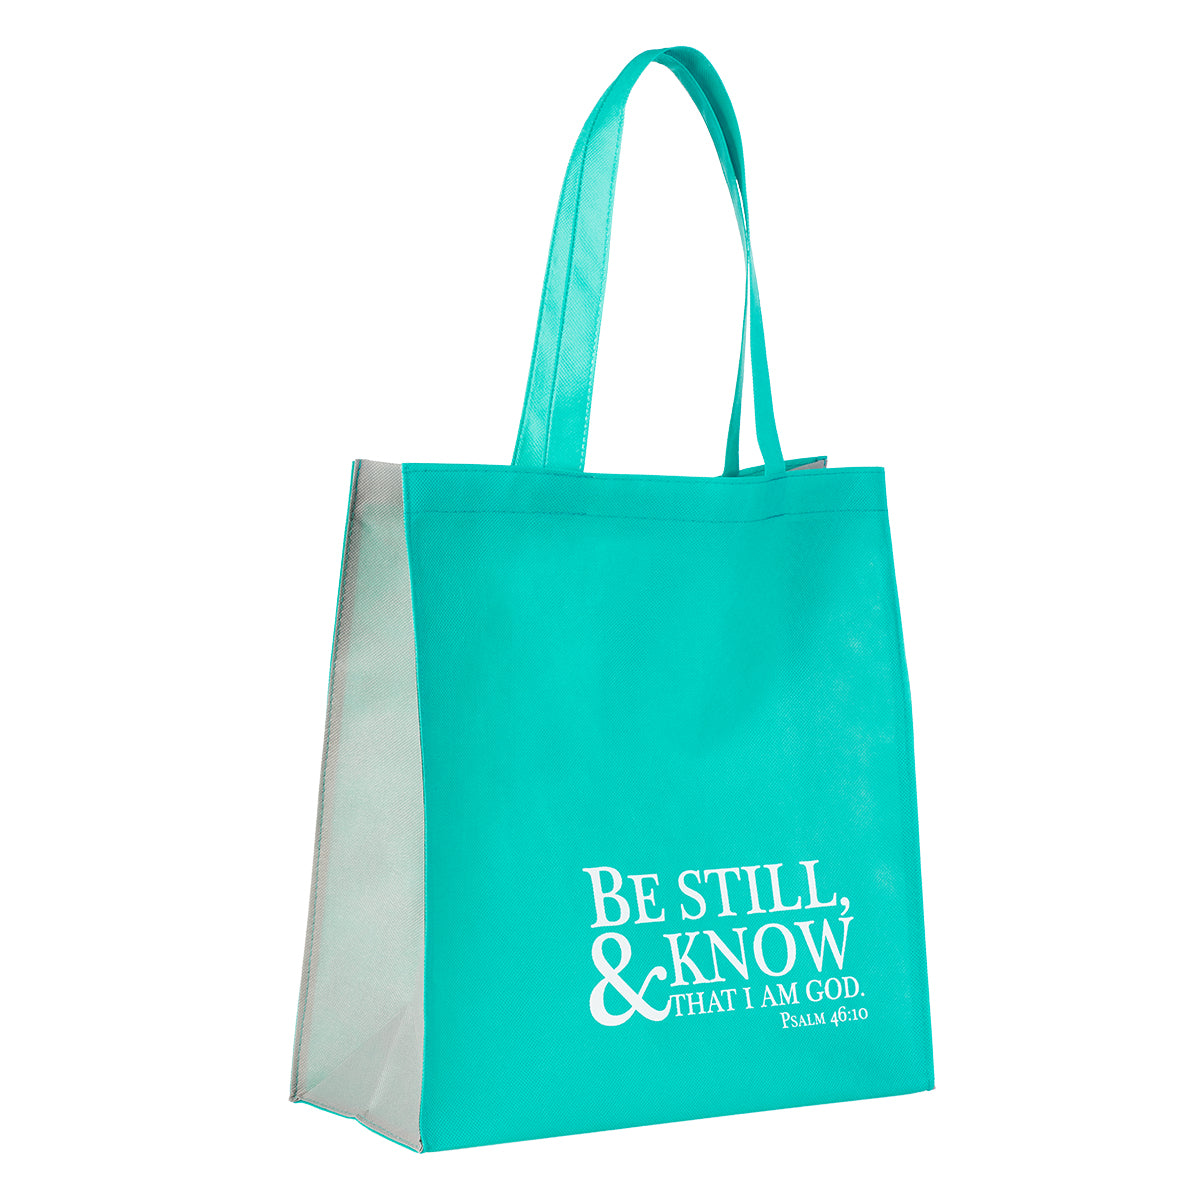 Image of Be Still and Know - Psalm 46:10 Tote Bag other